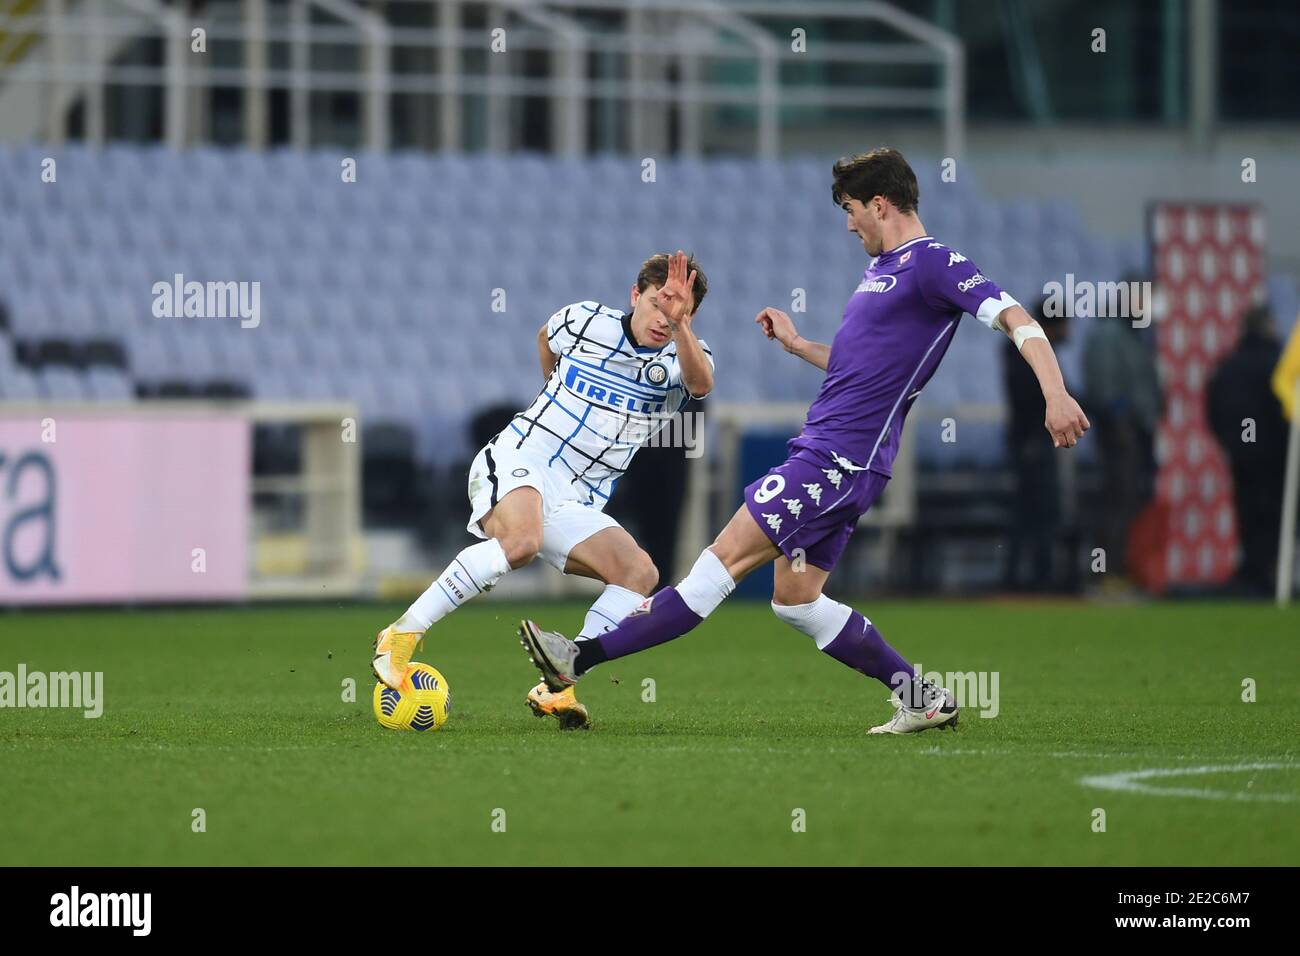 Nicolo Barella (Inter)Dusan Vlahovic (Fiorentina) during the Italian "Serie  A Tim Cup match between Fiorentina 1- 2 (d.t.s.) Inter at Artemio Franchi  Stadium on January 13, 2021 in Florence, Italy. Credit: Maurizio